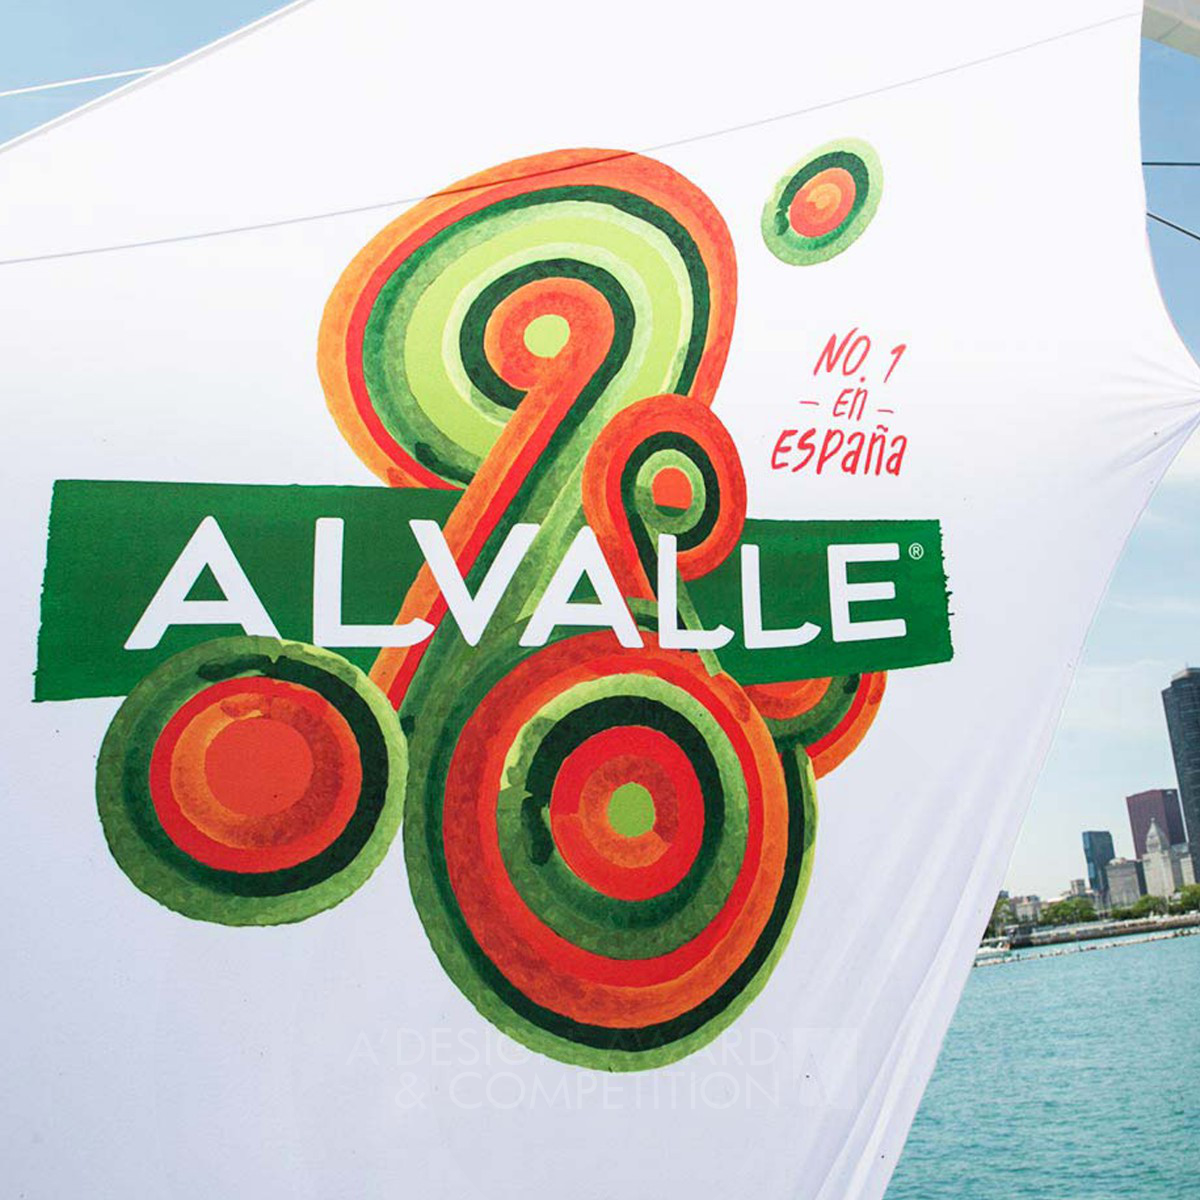 Alvalle Gazpacheria Event  Consumer Experience by PepsiCo Design and Innovation